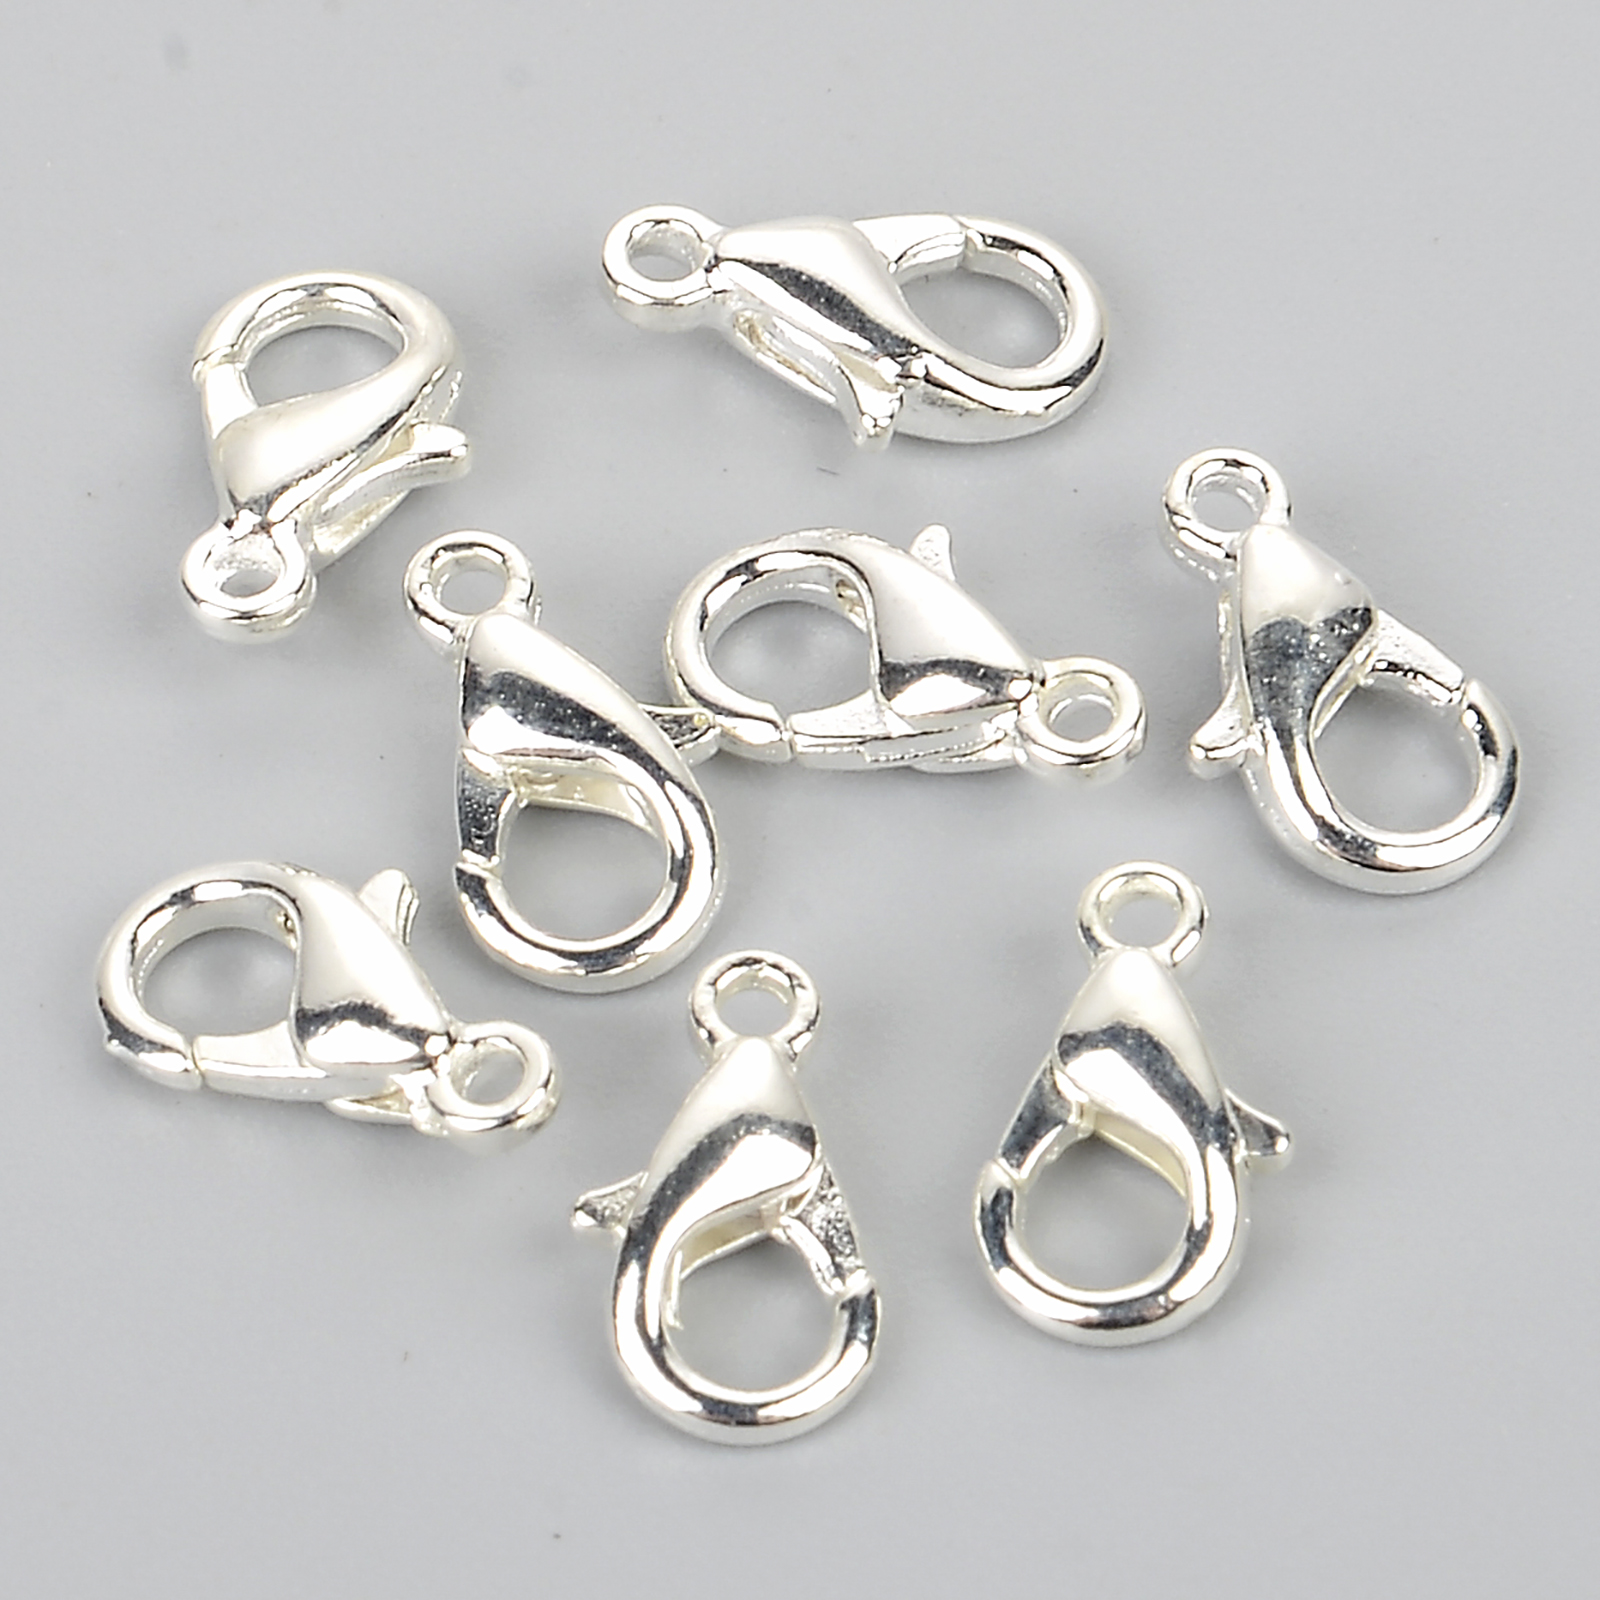 Cheap 10Pcs 10 12 14 mm Lobster Clasps Hooks With Jump Rings End Clasps  Connectors For DIY Jewelry Making Supplies Accessories